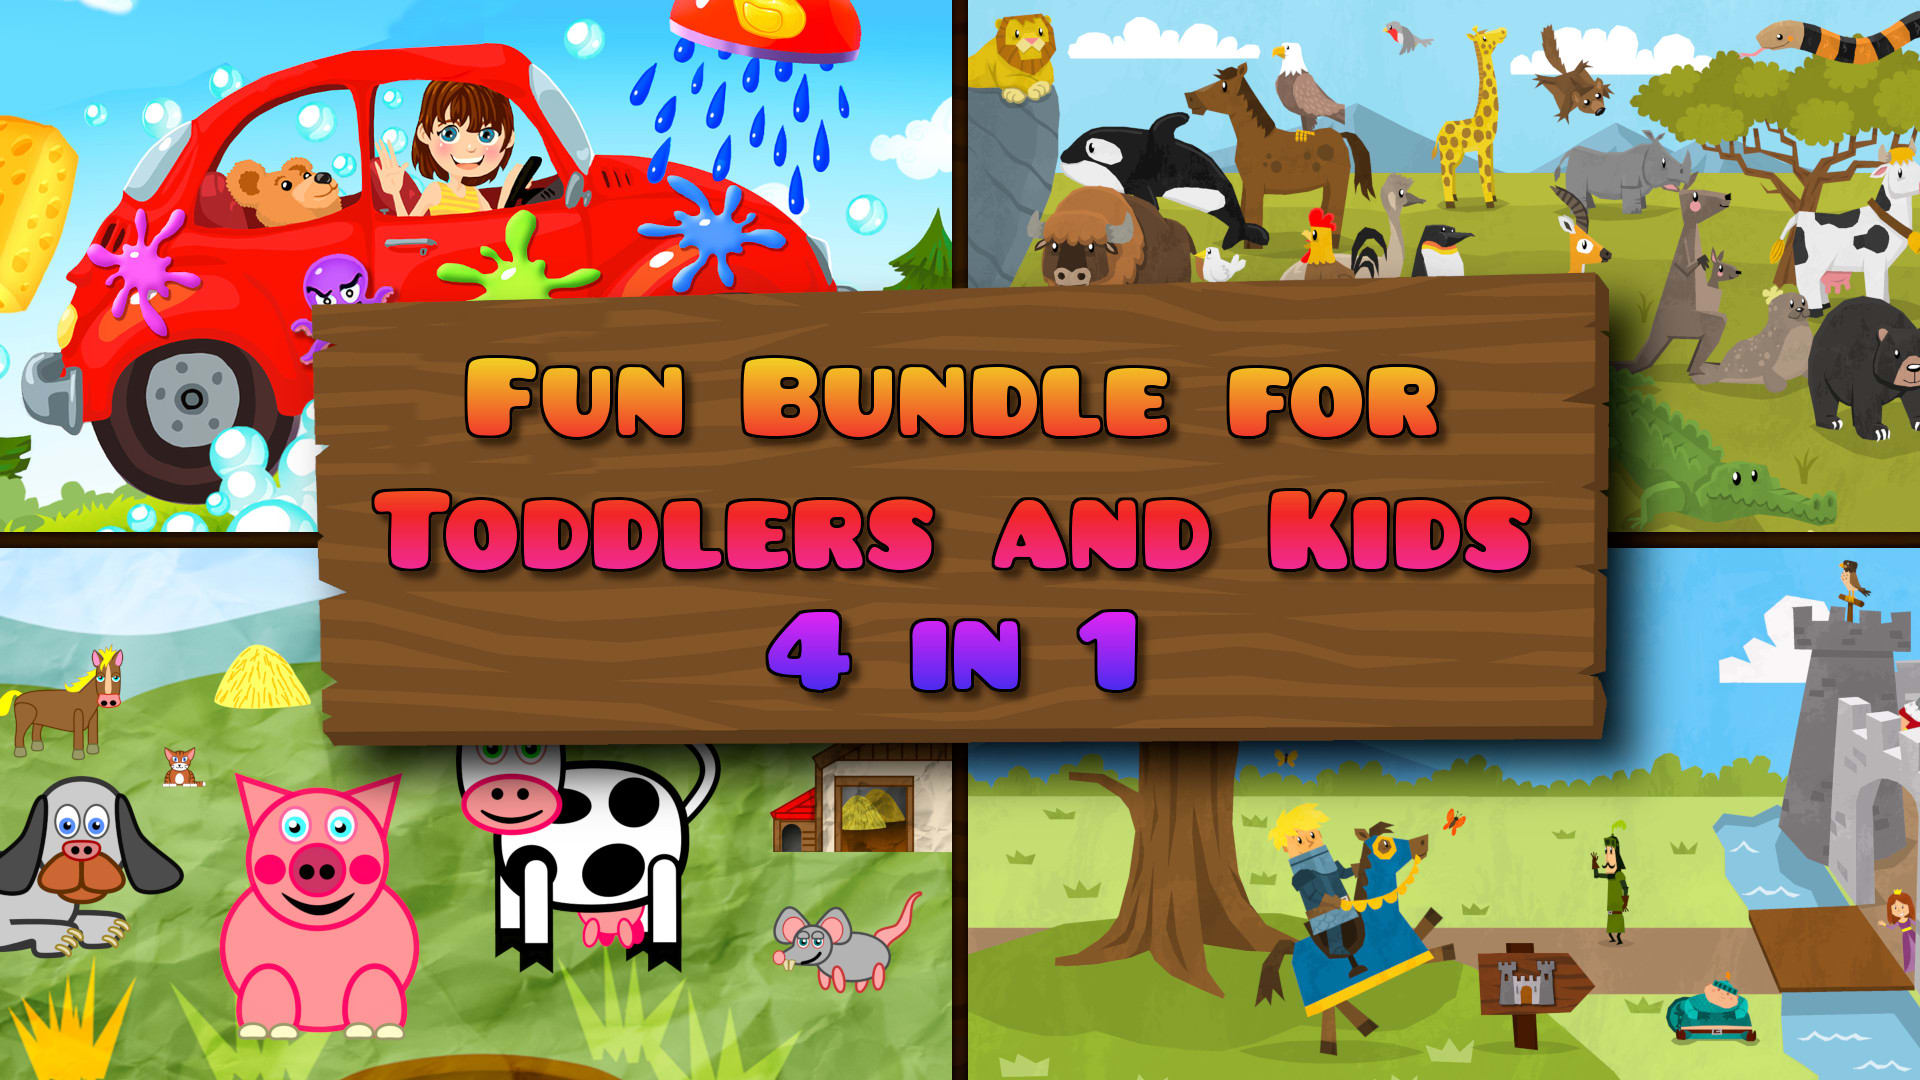 Fun Bundle for Toddlers and Kids - 4 in 1